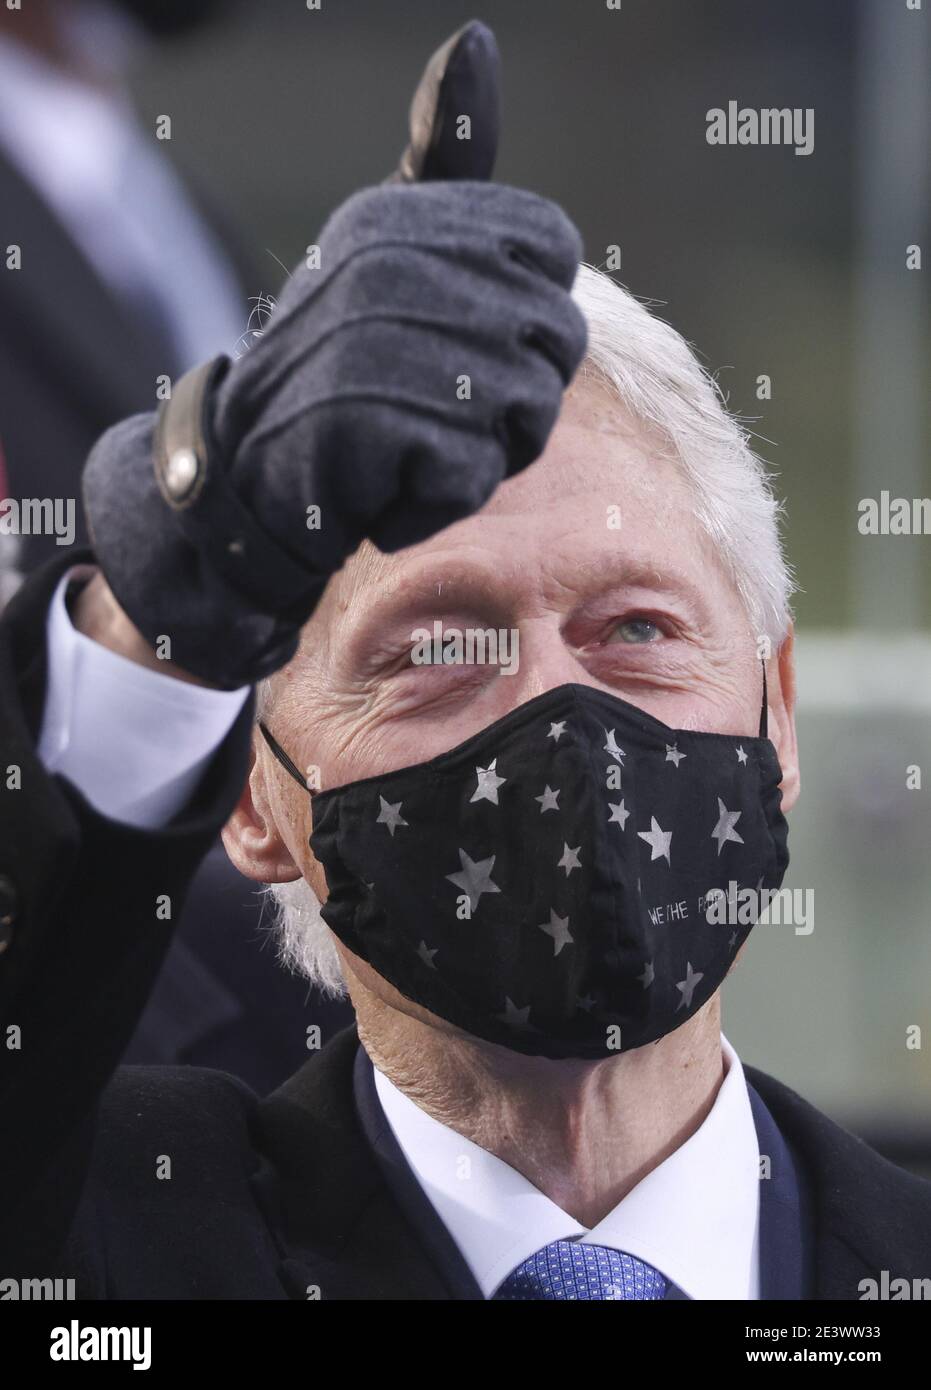 Washington, United States. 20th Jan, 2021. Former U.S. President Bill Clinton gestures as he attends the inauguration of Joe Biden as the 46th President of the United States on the West Front of the U.S. Capitol in Washington, DC on Wednesday, January 20, 2021. Pool Photo by Jonathan Ernst/UPI Credit: UPI/Alamy Live News Stock Photo